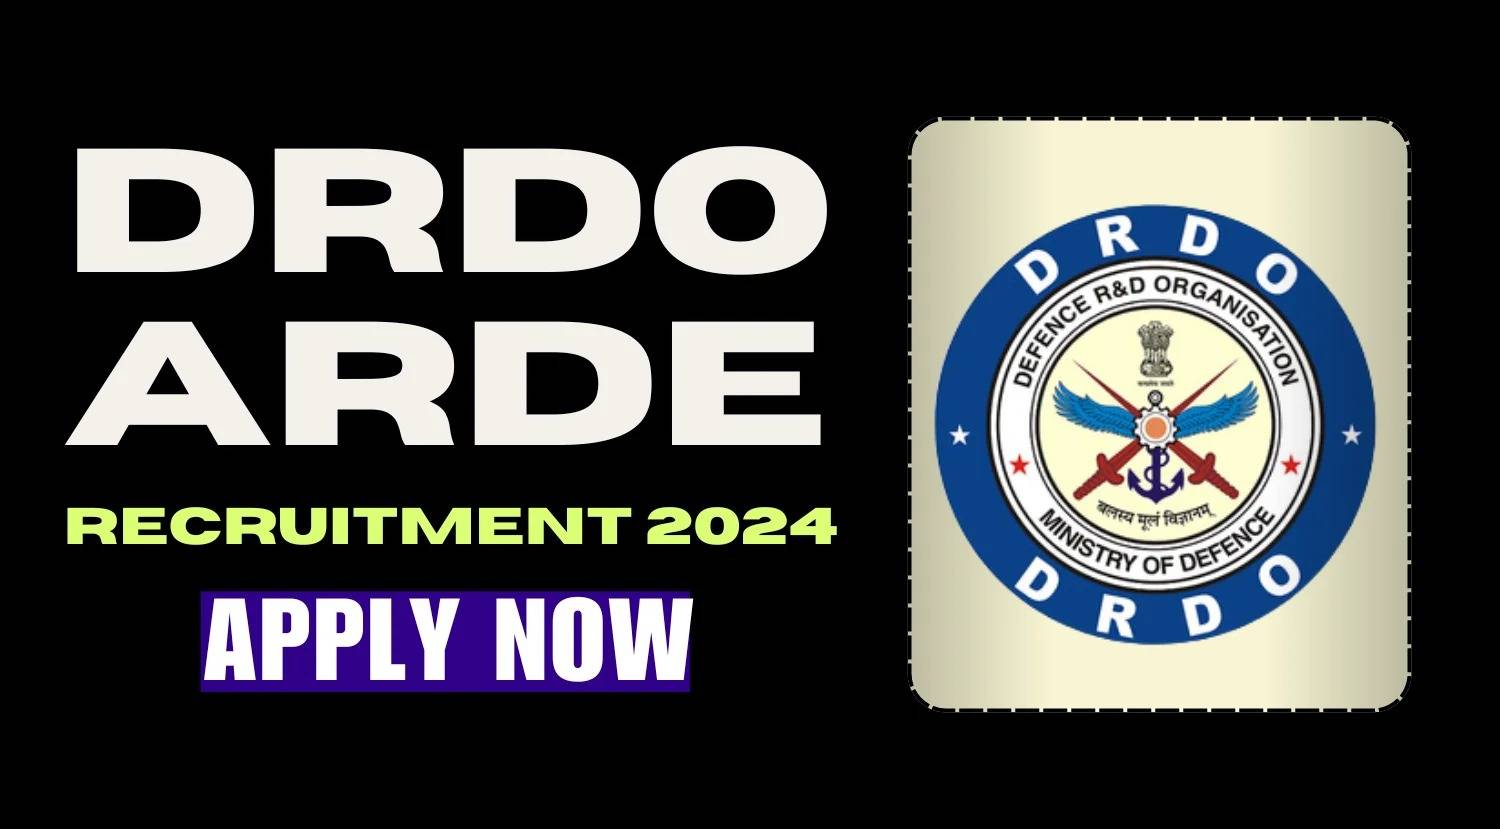 DRDO ARDE Recruitment 2024: Multiple Research Positions Available, Apply Now